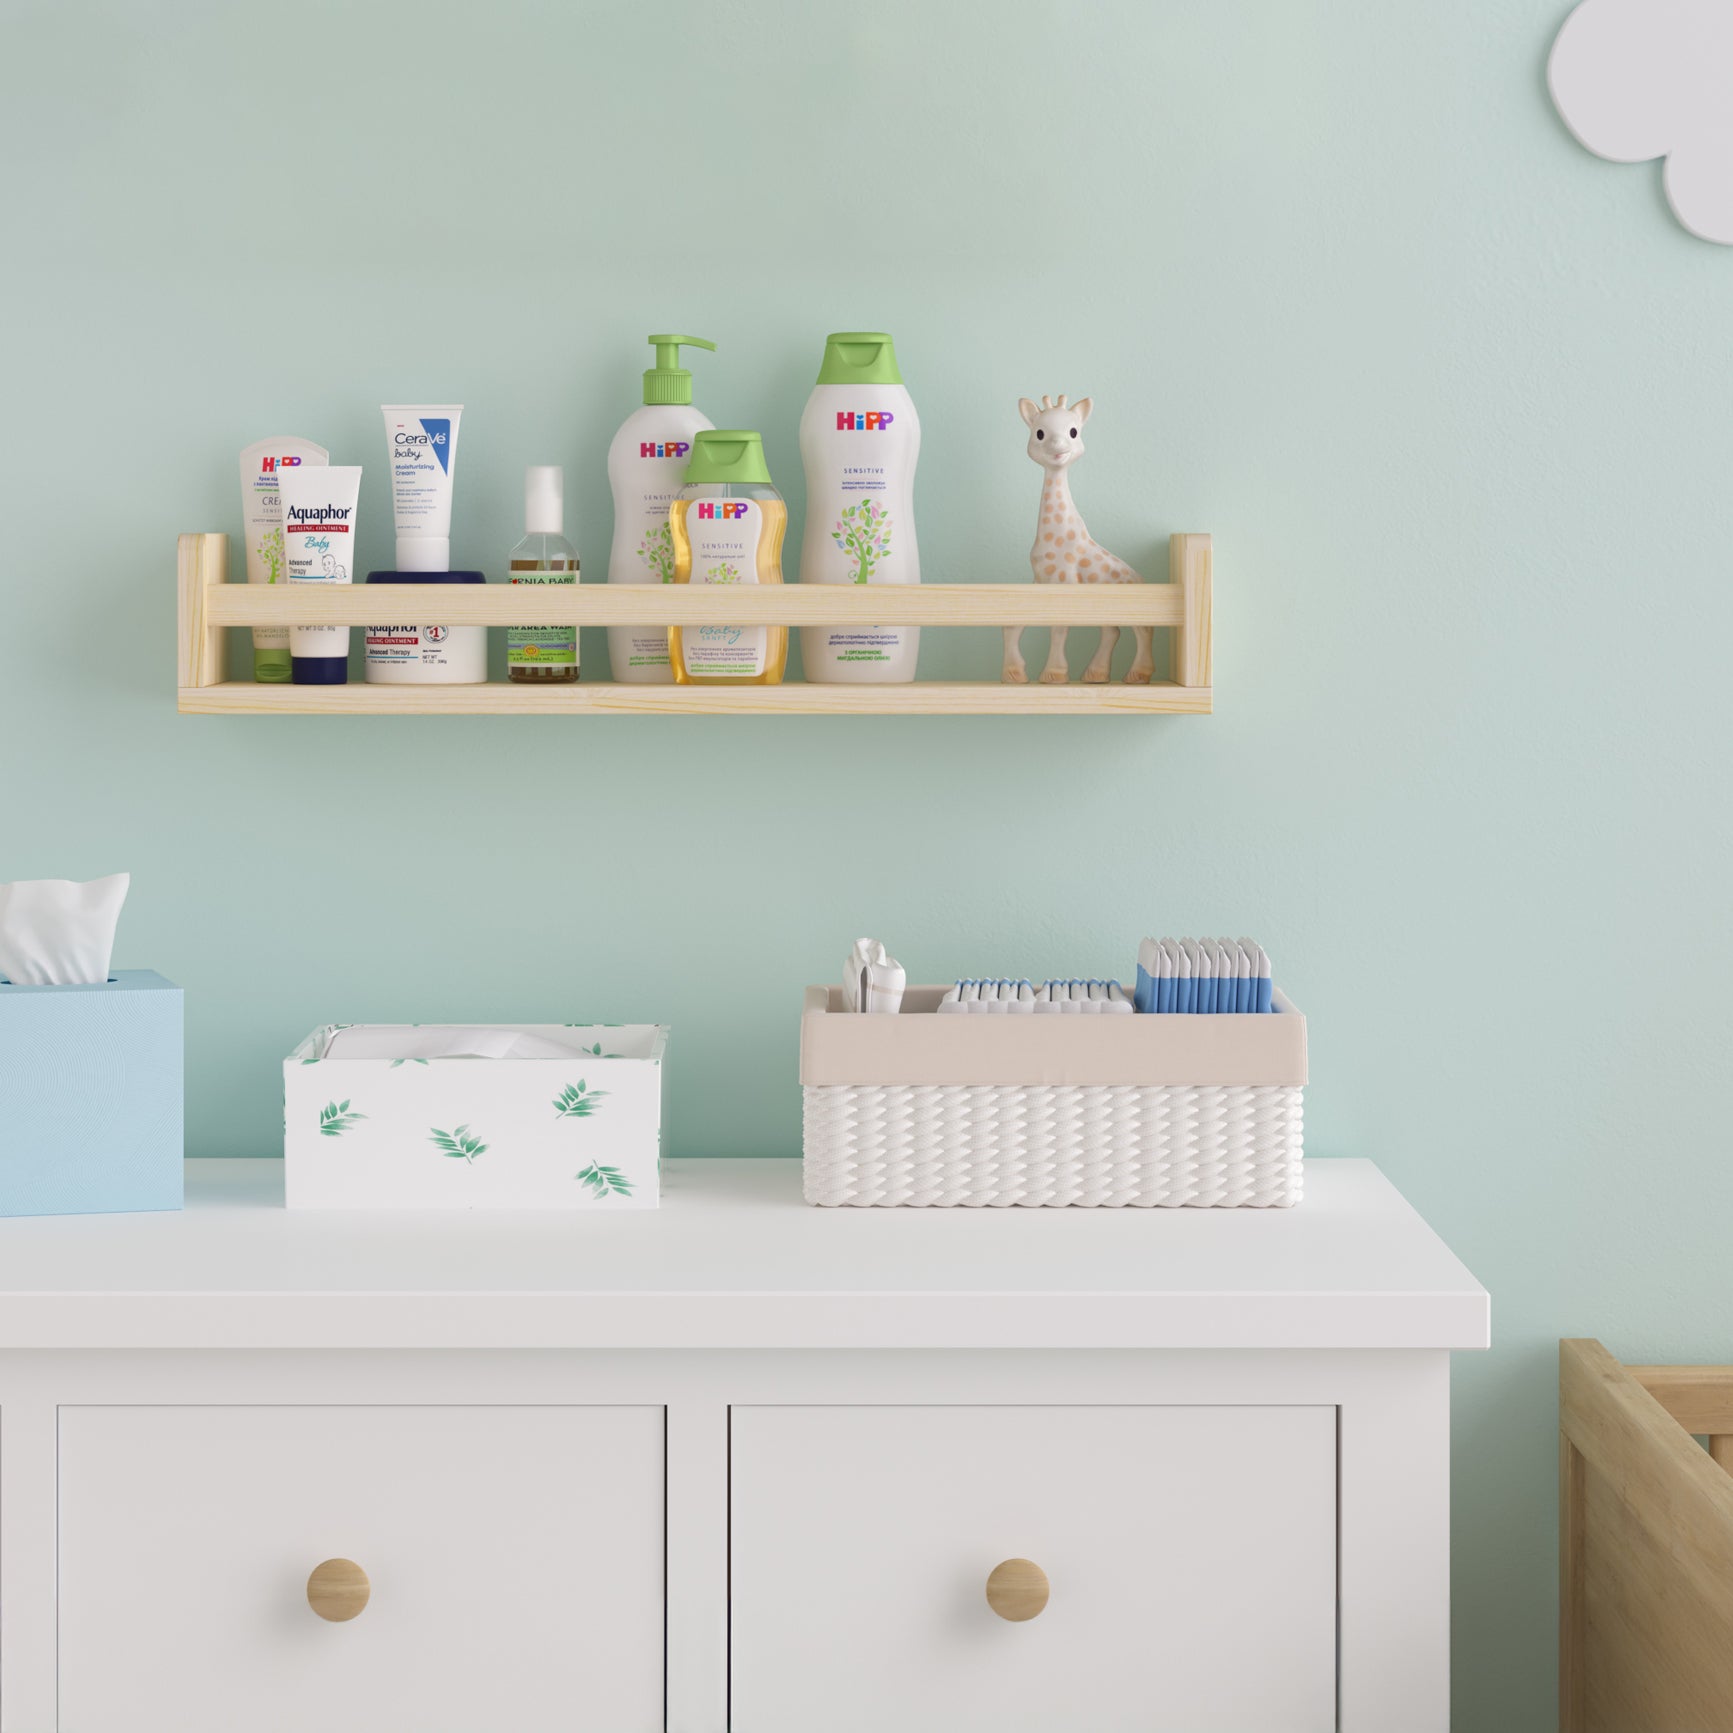 A natural wood kids shelf in a nursery, holding baby care products and a small giraffe toy. Mounted on a mint green wall above a white dresser, creating an organized and serene space for baby essentials.